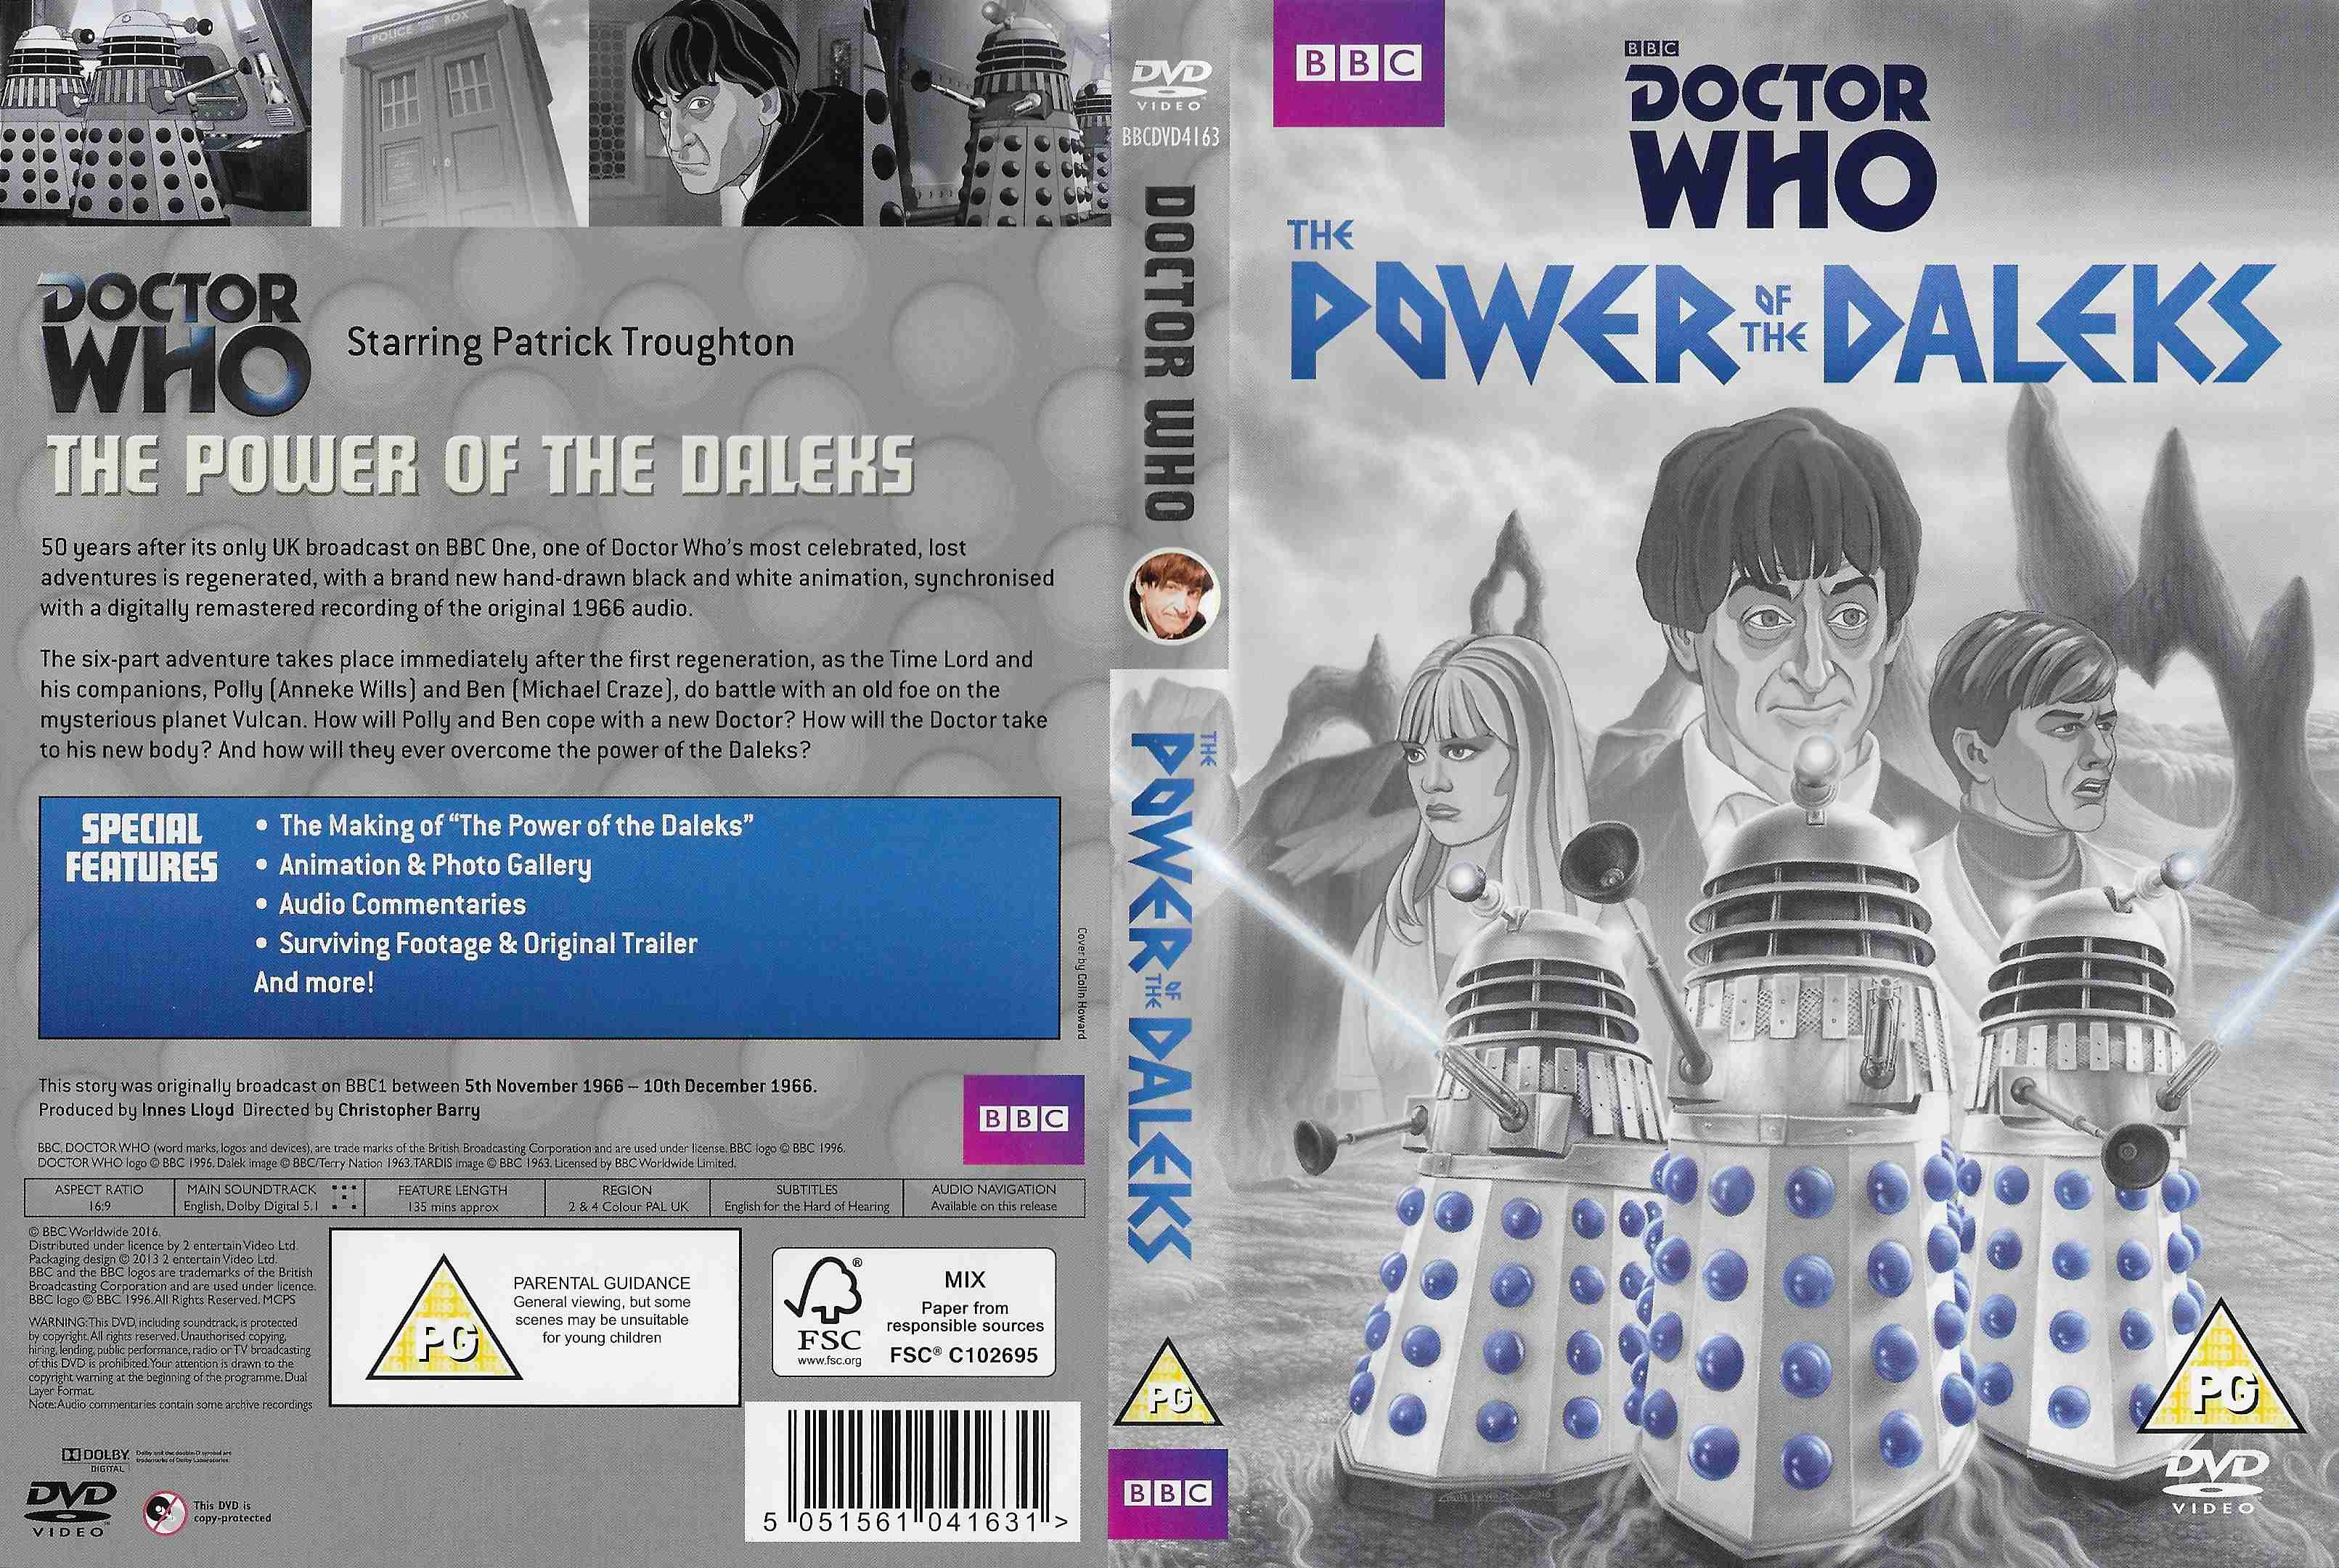 Picture of BBCDVD 4163 Doctor Who - The power of the Daleks by artist David Whitaker / Dennis Spooner from the BBC records and Tapes library